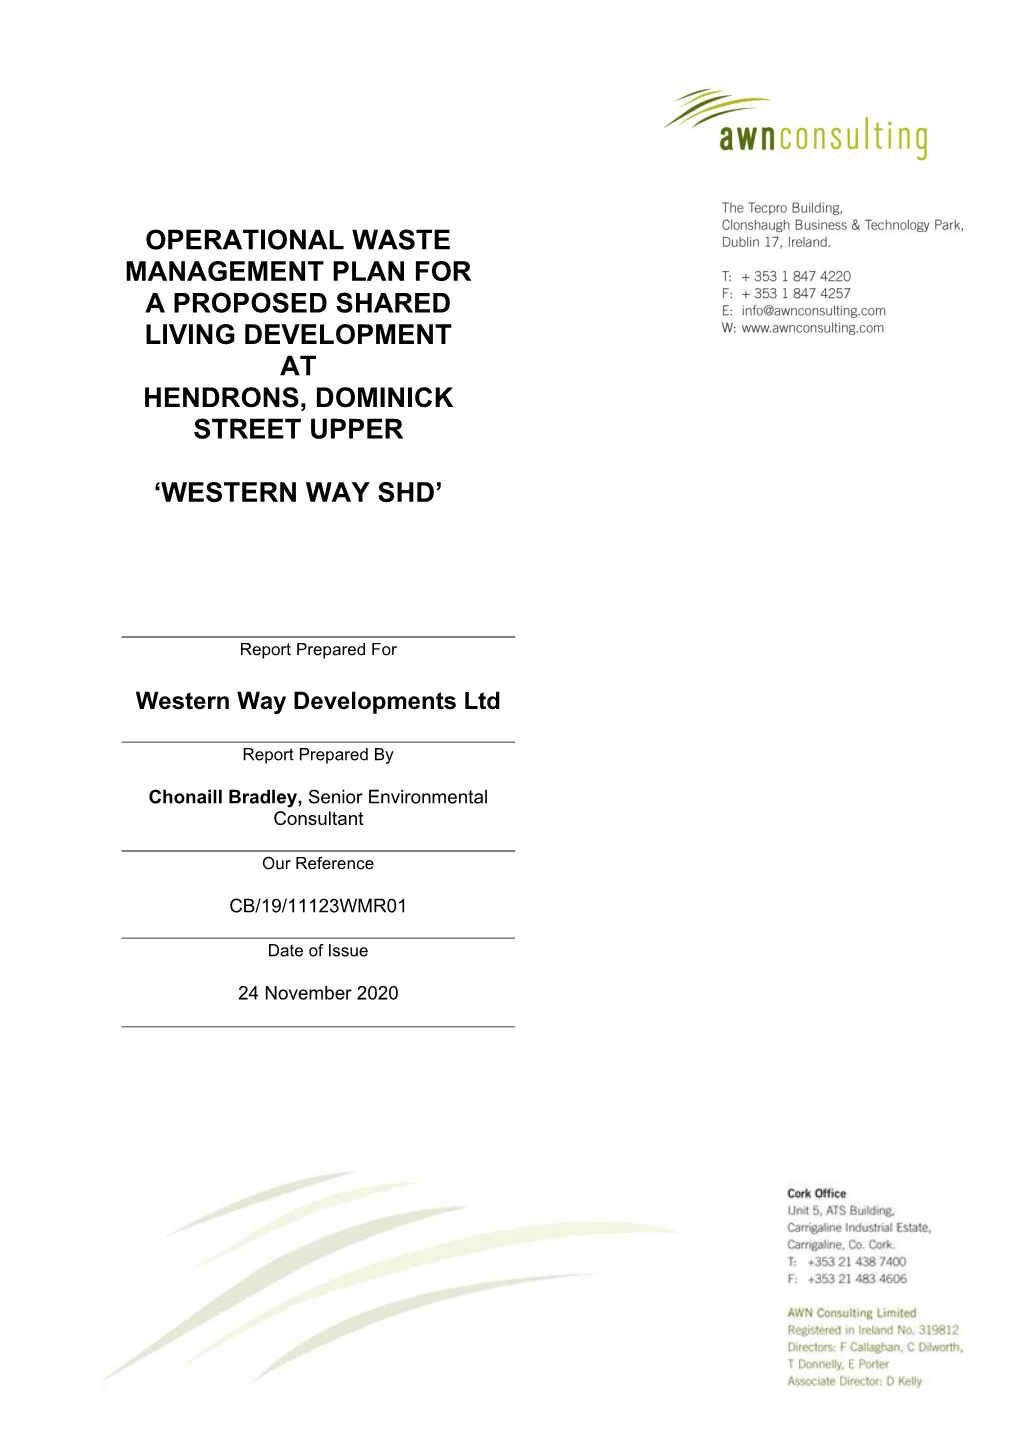 Operational Waste Management Plan for a Proposed Shared Living Development at Hendrons, Dominick Street Upper